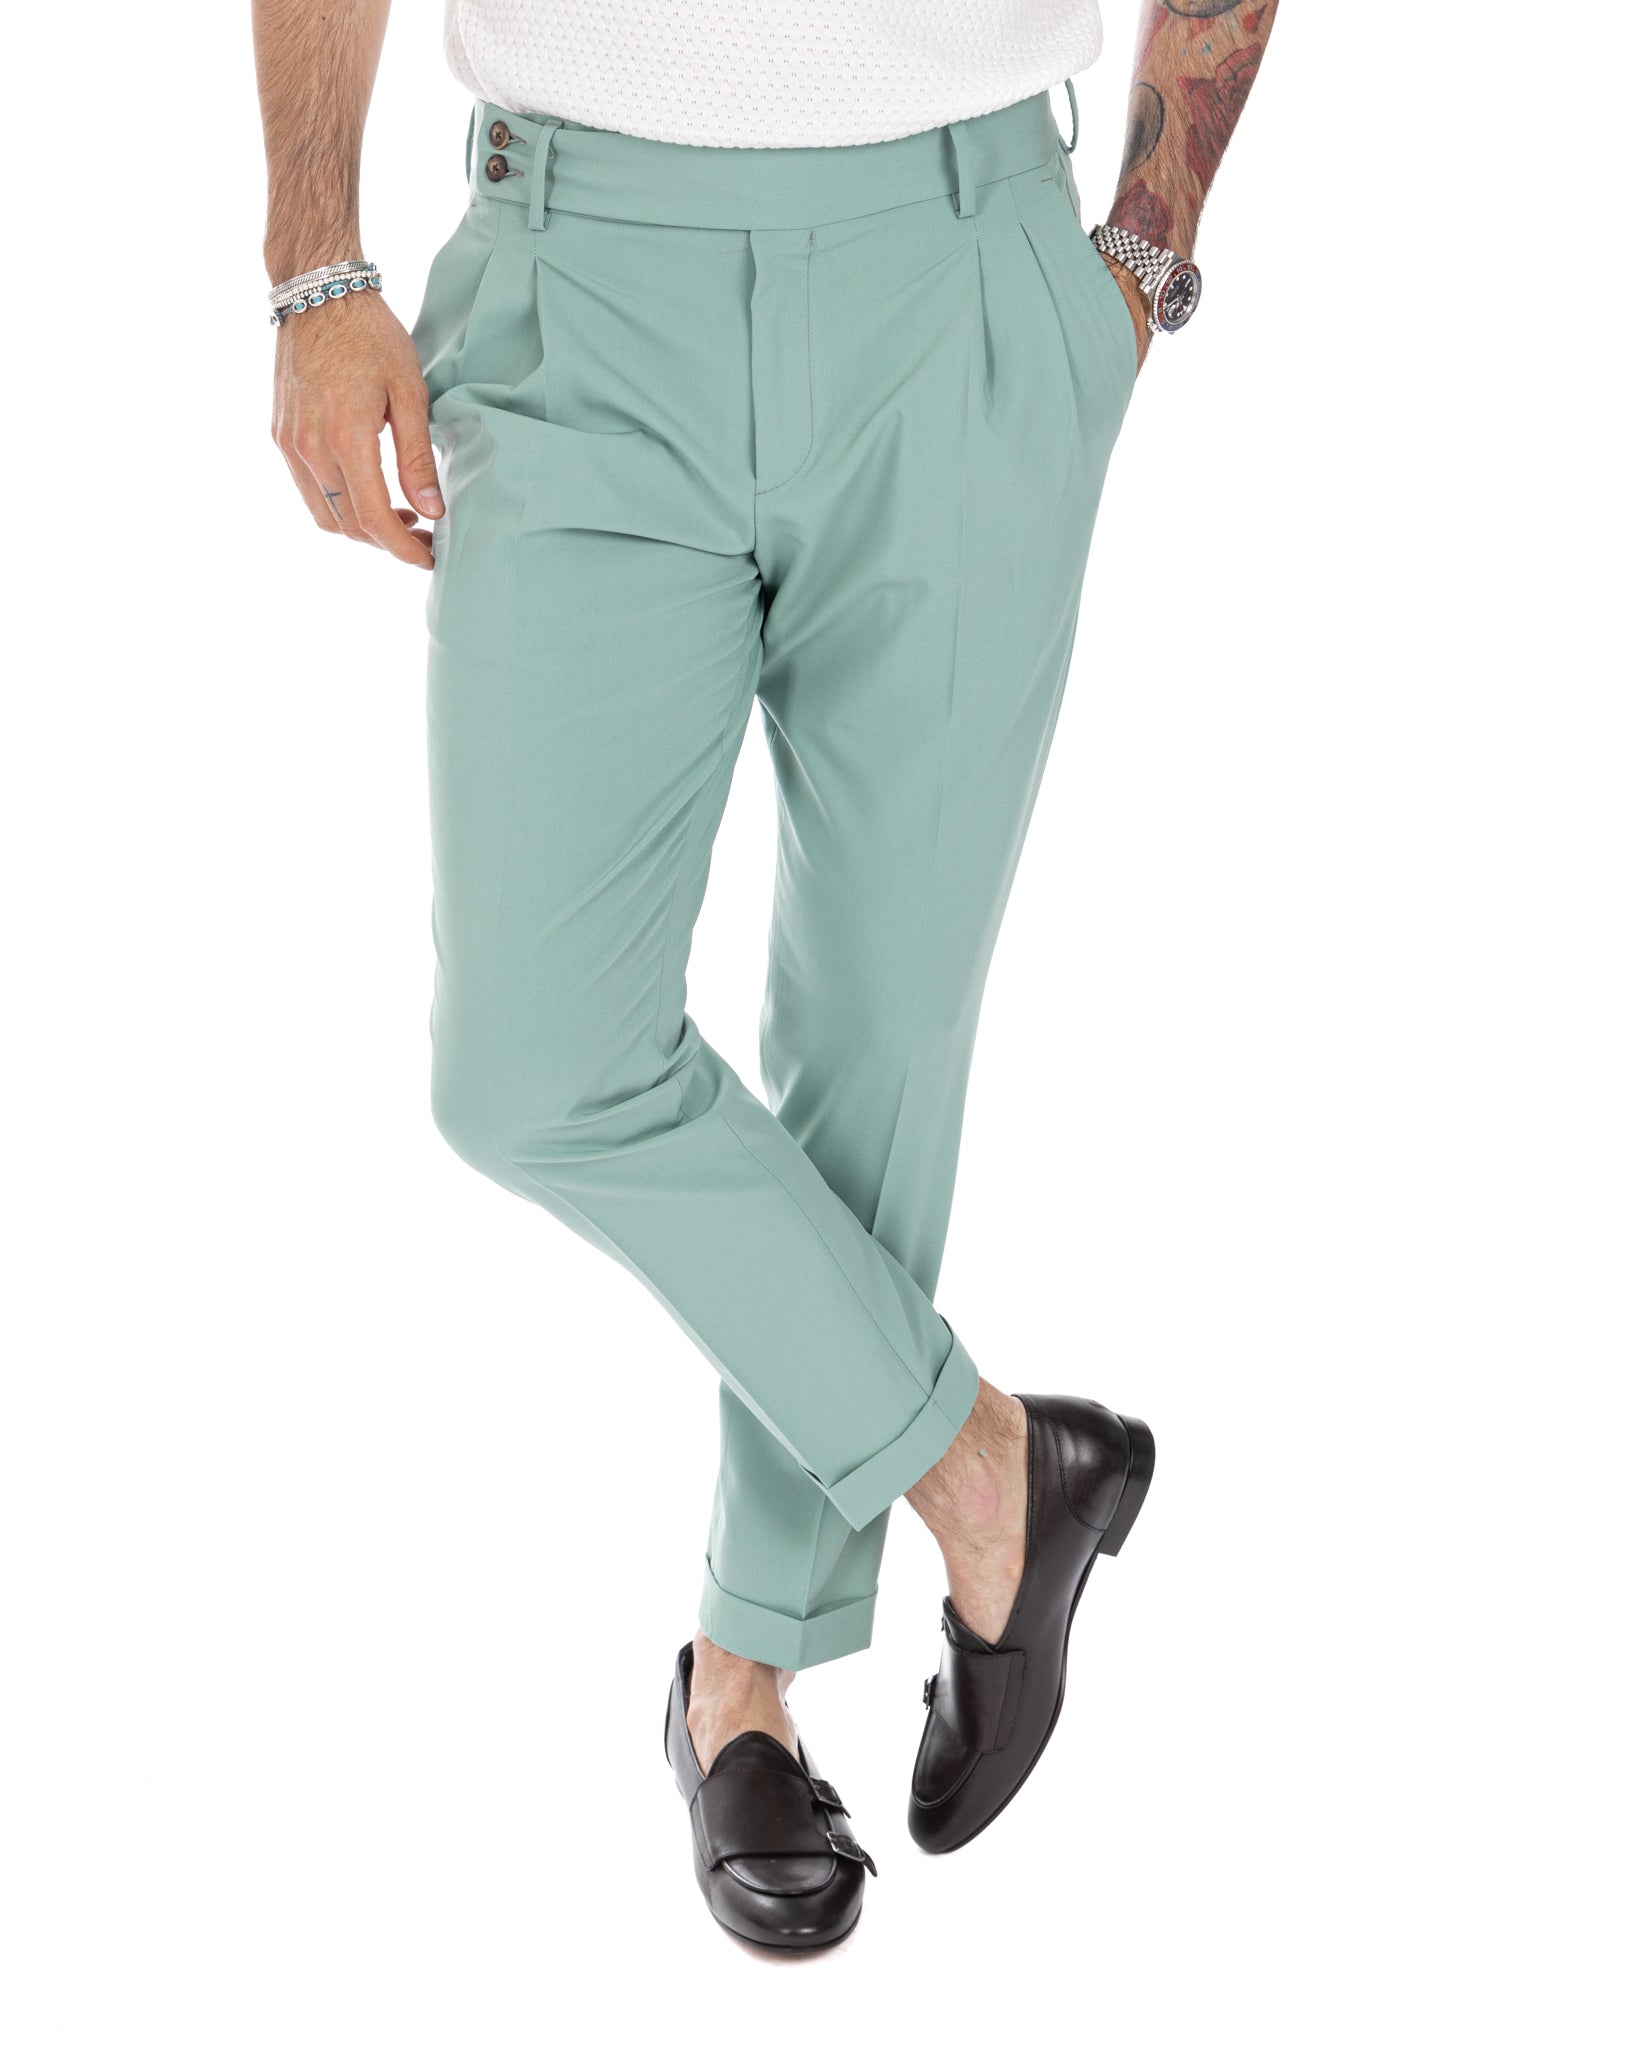 Caprera - turquoise high waisted trousers